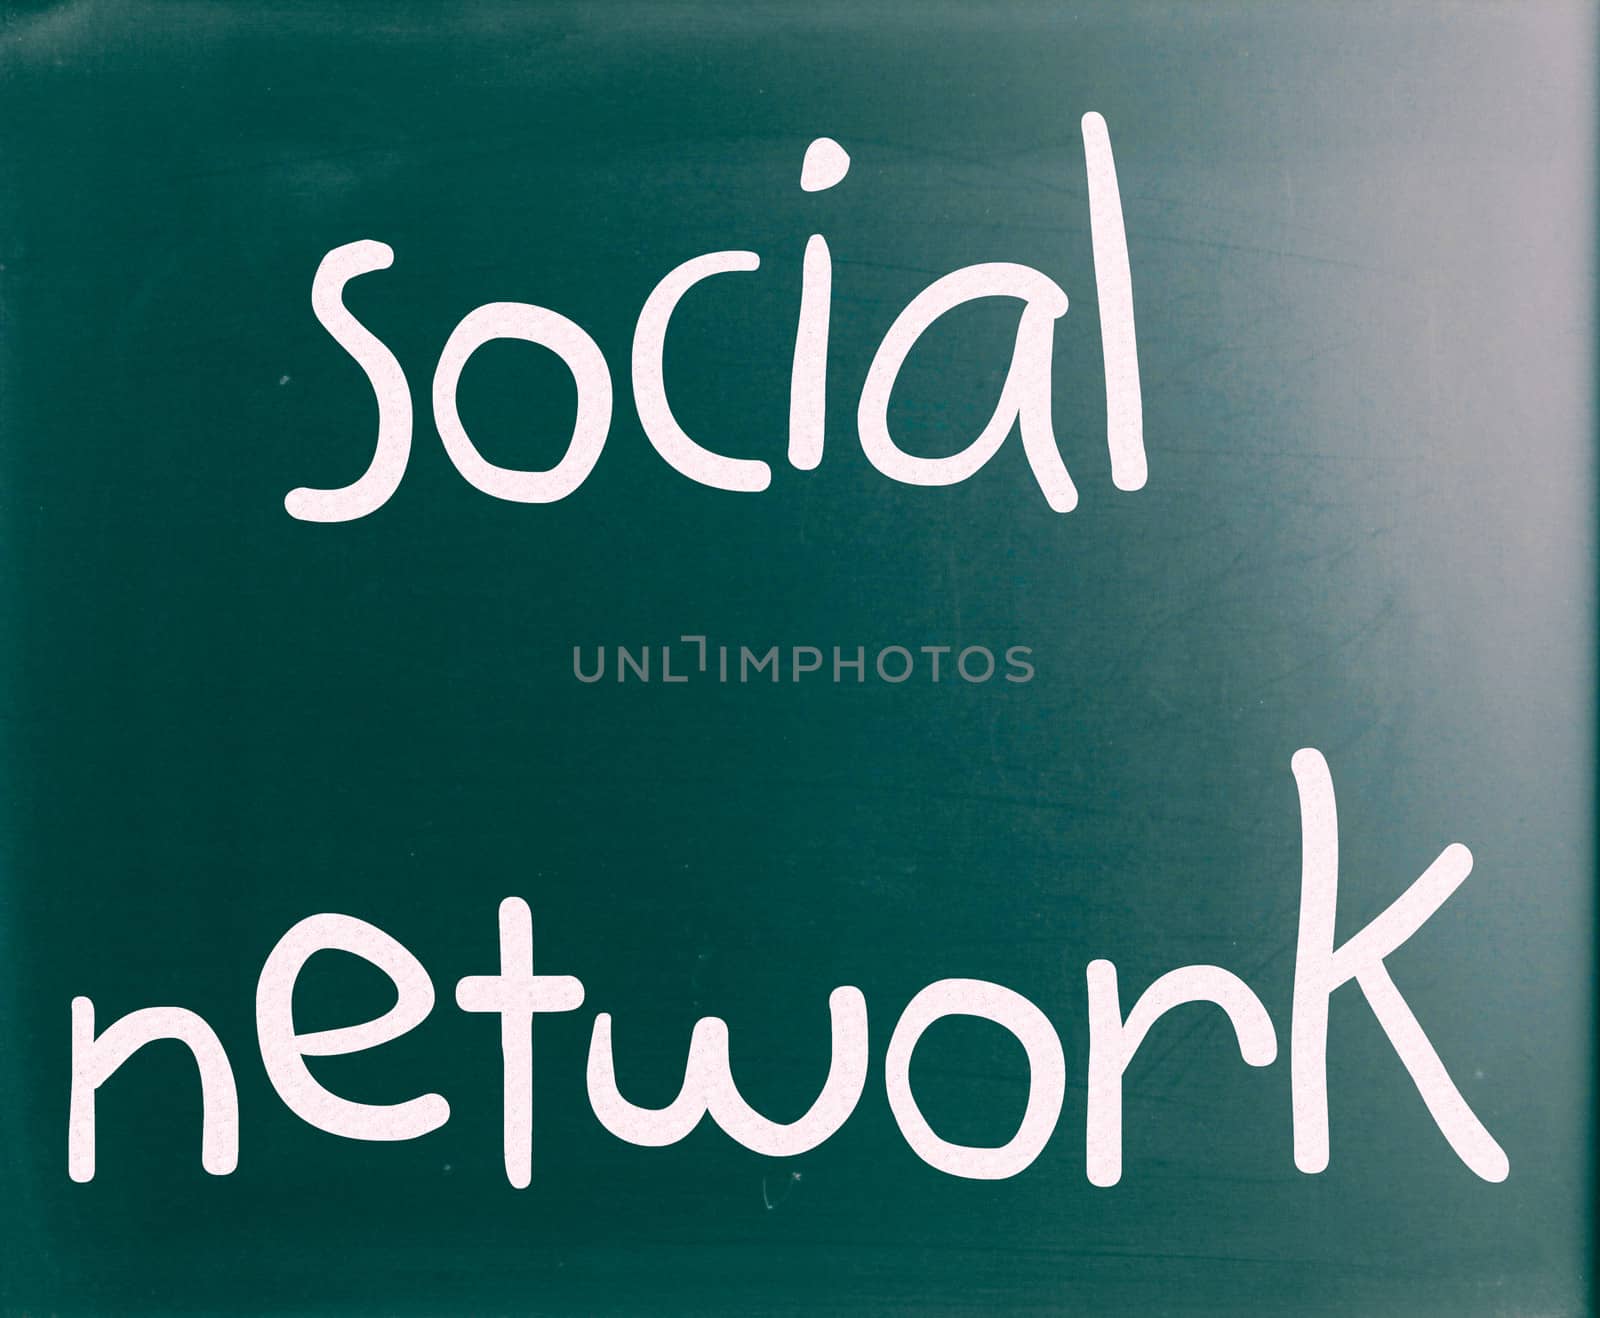 The word "Social network" handwritten with white chalk on a blac by nenov